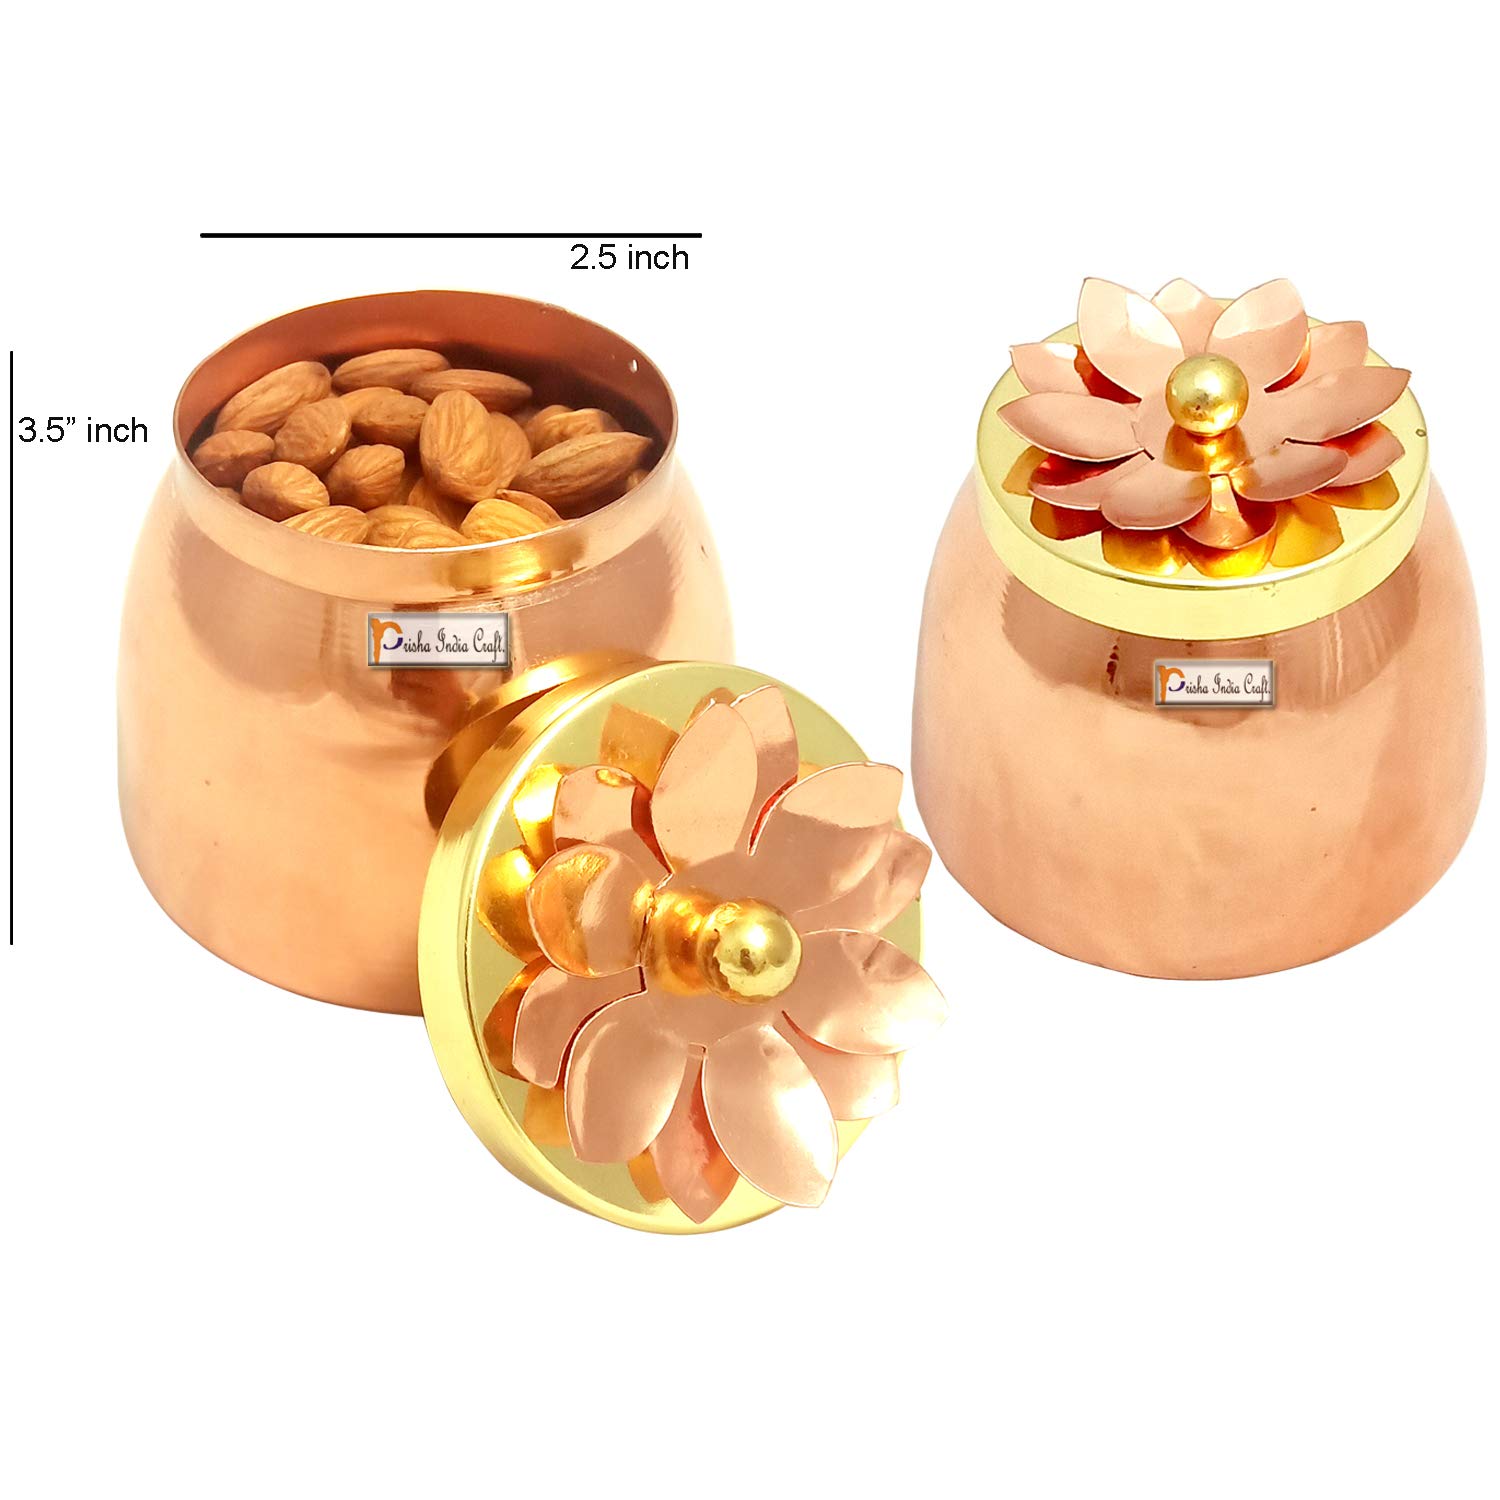 Prisha India Craft Copper Plating Dry Fruit Container Decorative Serving Bowls, Set of 2 Pieces, Gold